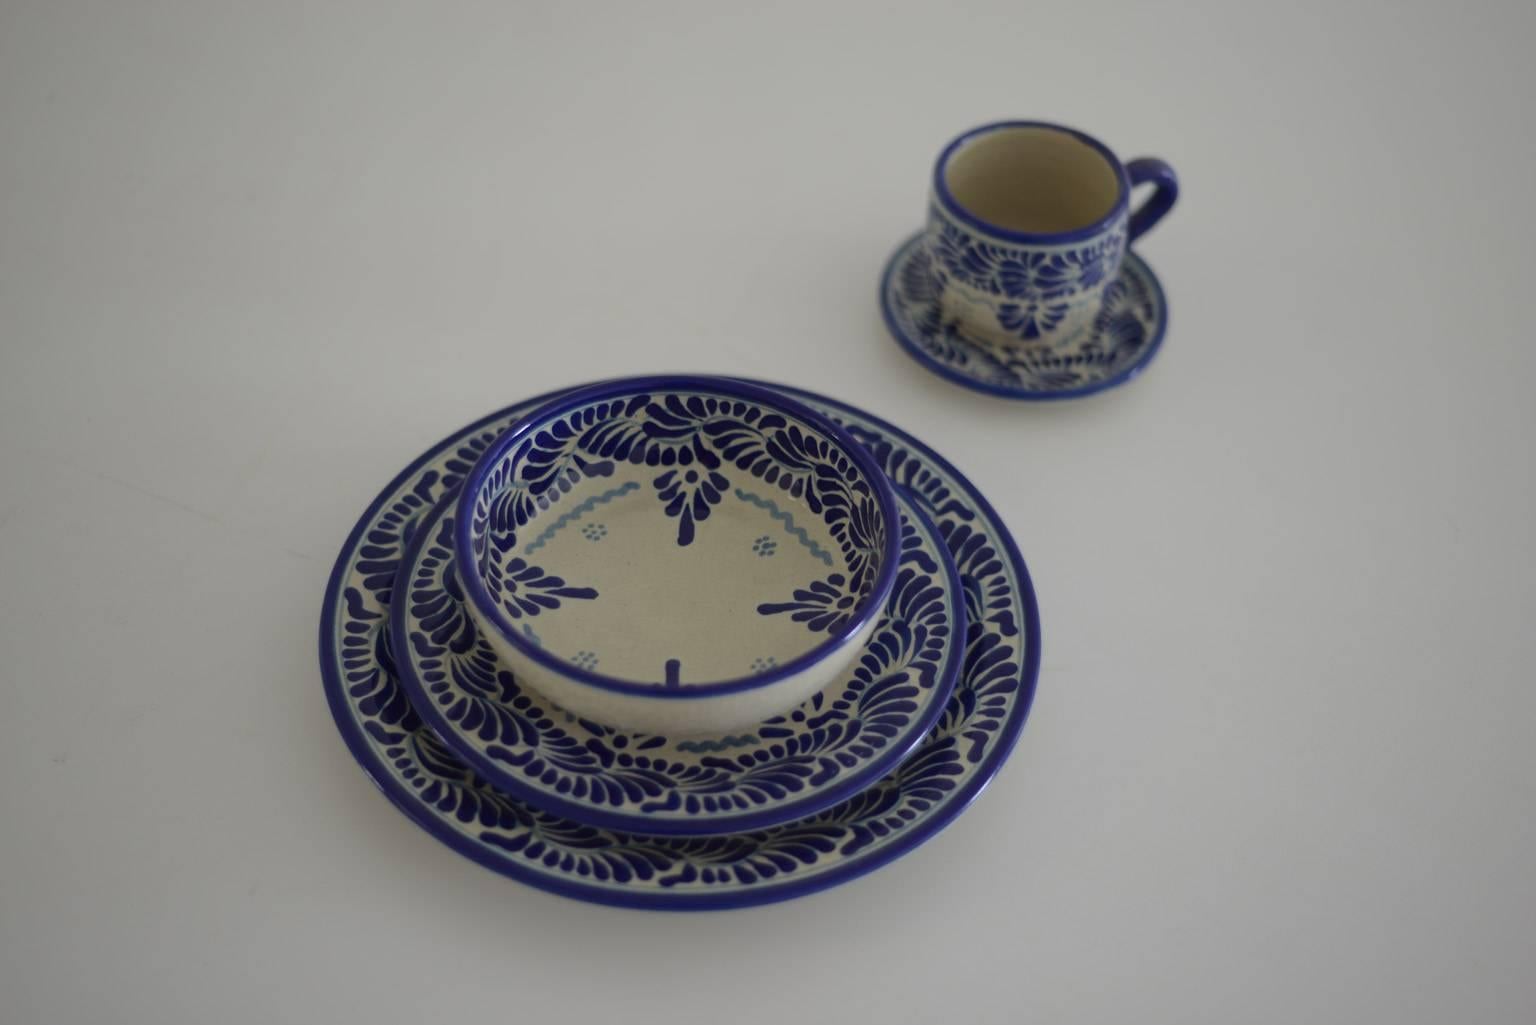 This design is hand-painted is one of the most traditional in talavera.
Service for 12:
12 dinner plate 27 cm.
12 salad plate 20 cm.
12 soup bowl 15 cm.
12 bread plate 14 cm.
12 coffee cup 7 cm.
12 butter plate.
12 espresso cup.
One round